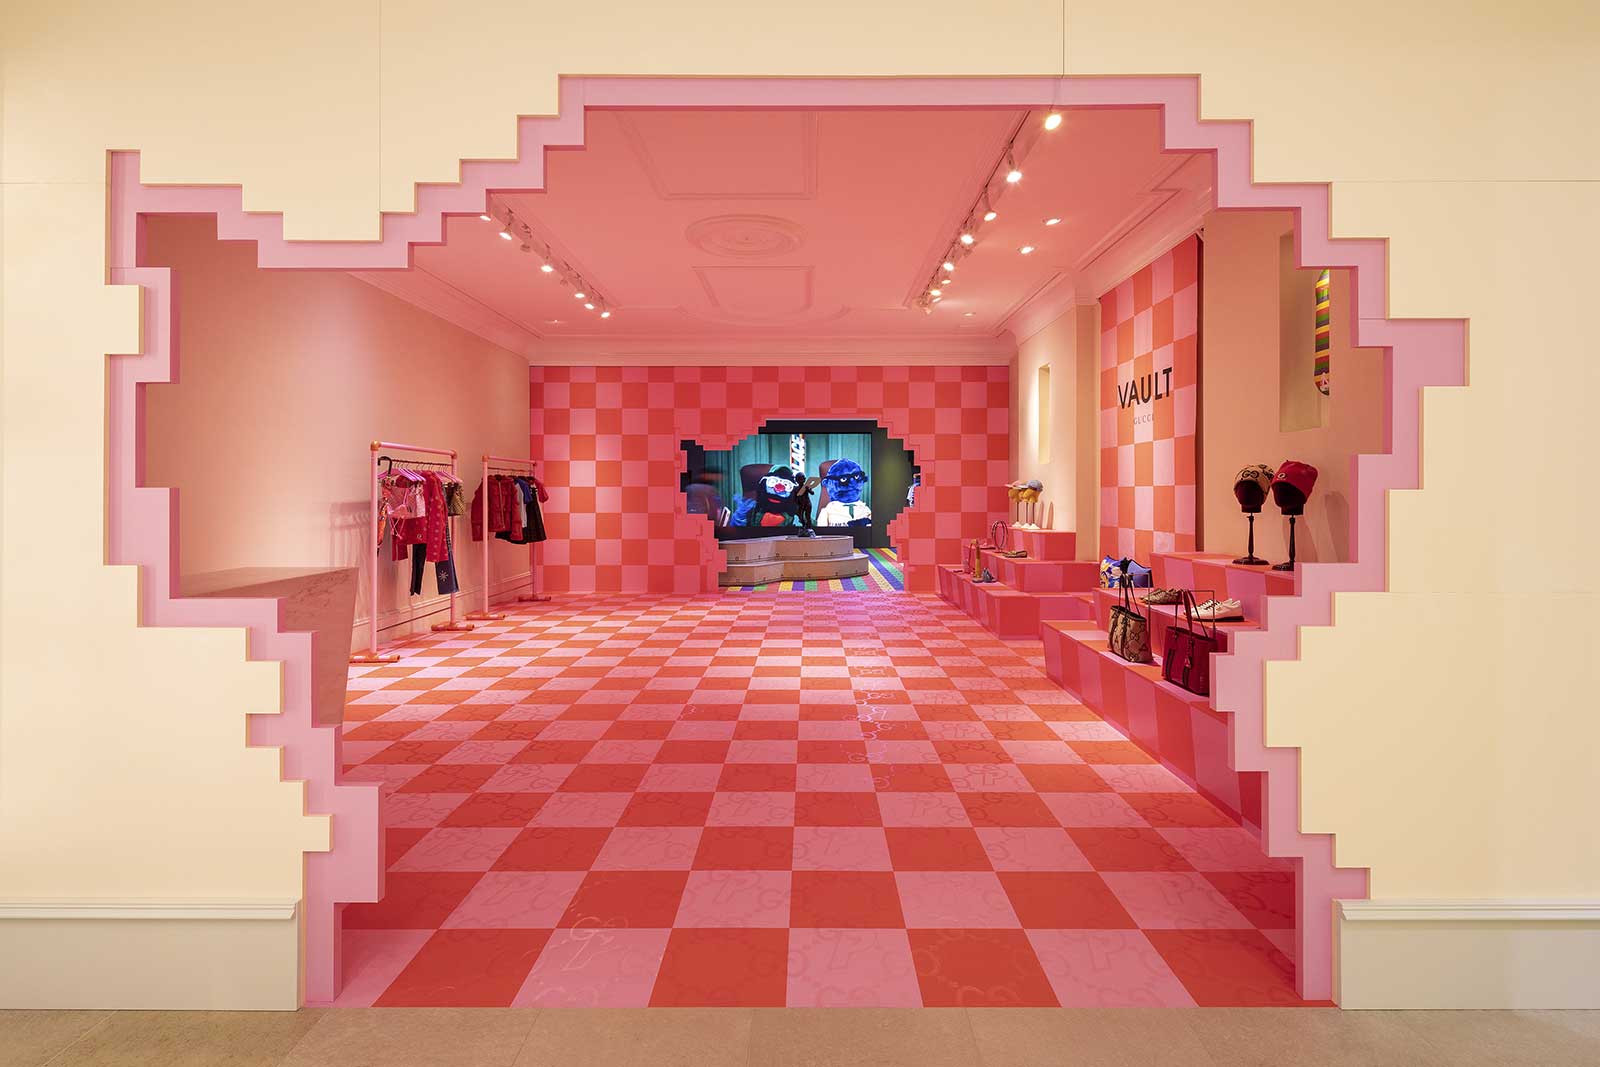 Gucci Vault and the Palace Gucci collection land in New York and LA